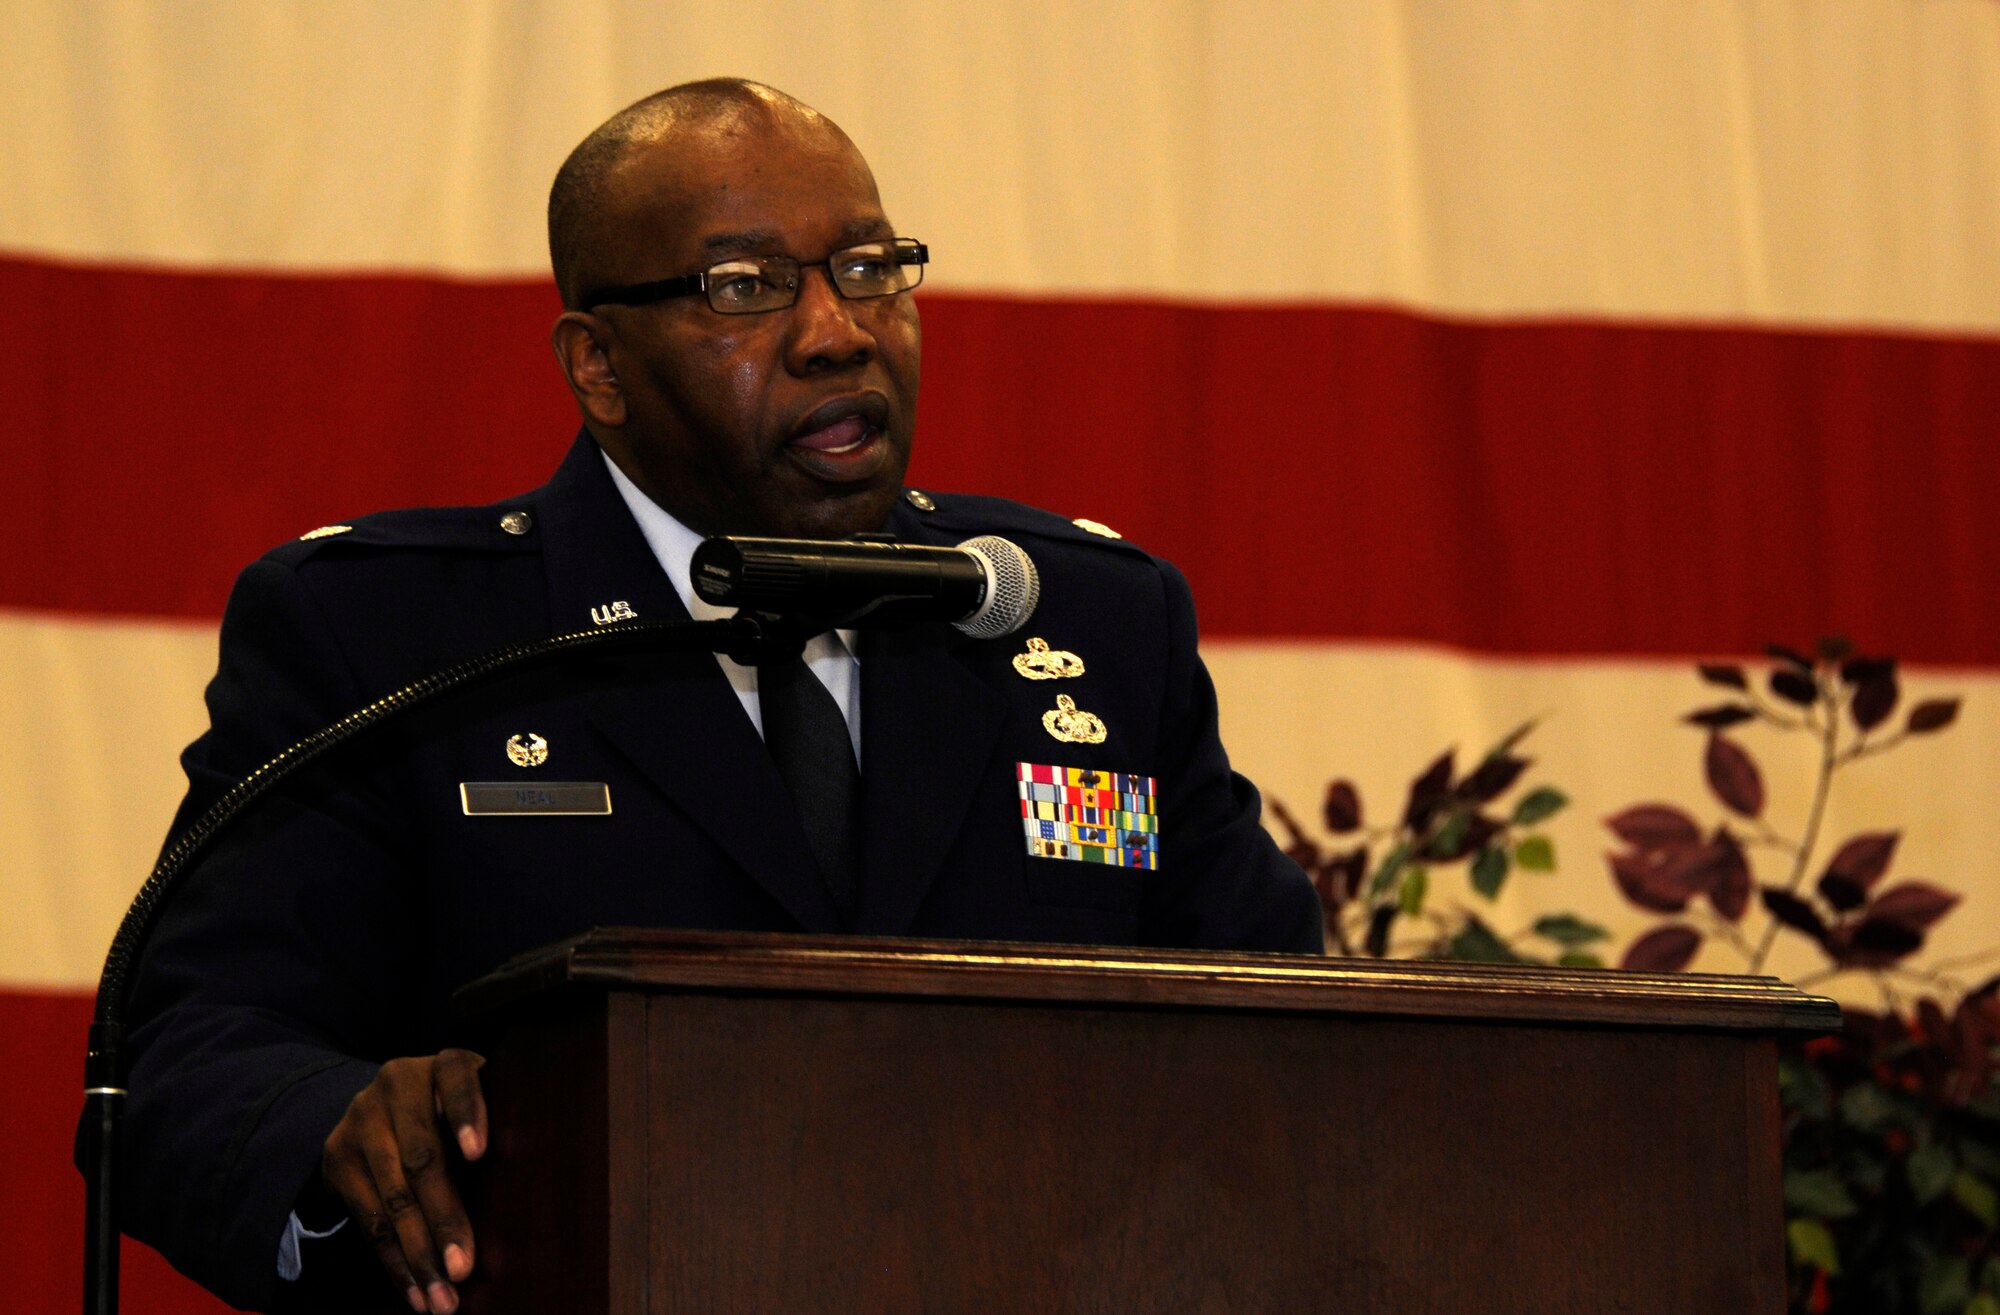 Lt. Col. Anderson Neal delivers a speech during an assumption of command ceremony at the 188th Fighter Wing Dec. 2, 2012. Colonel Neal assumed command of the 188th Maintenance Group during the ceremony. (National Guard photo by Amn. Cody Martin/188th Fighter Wing Public Affairs)